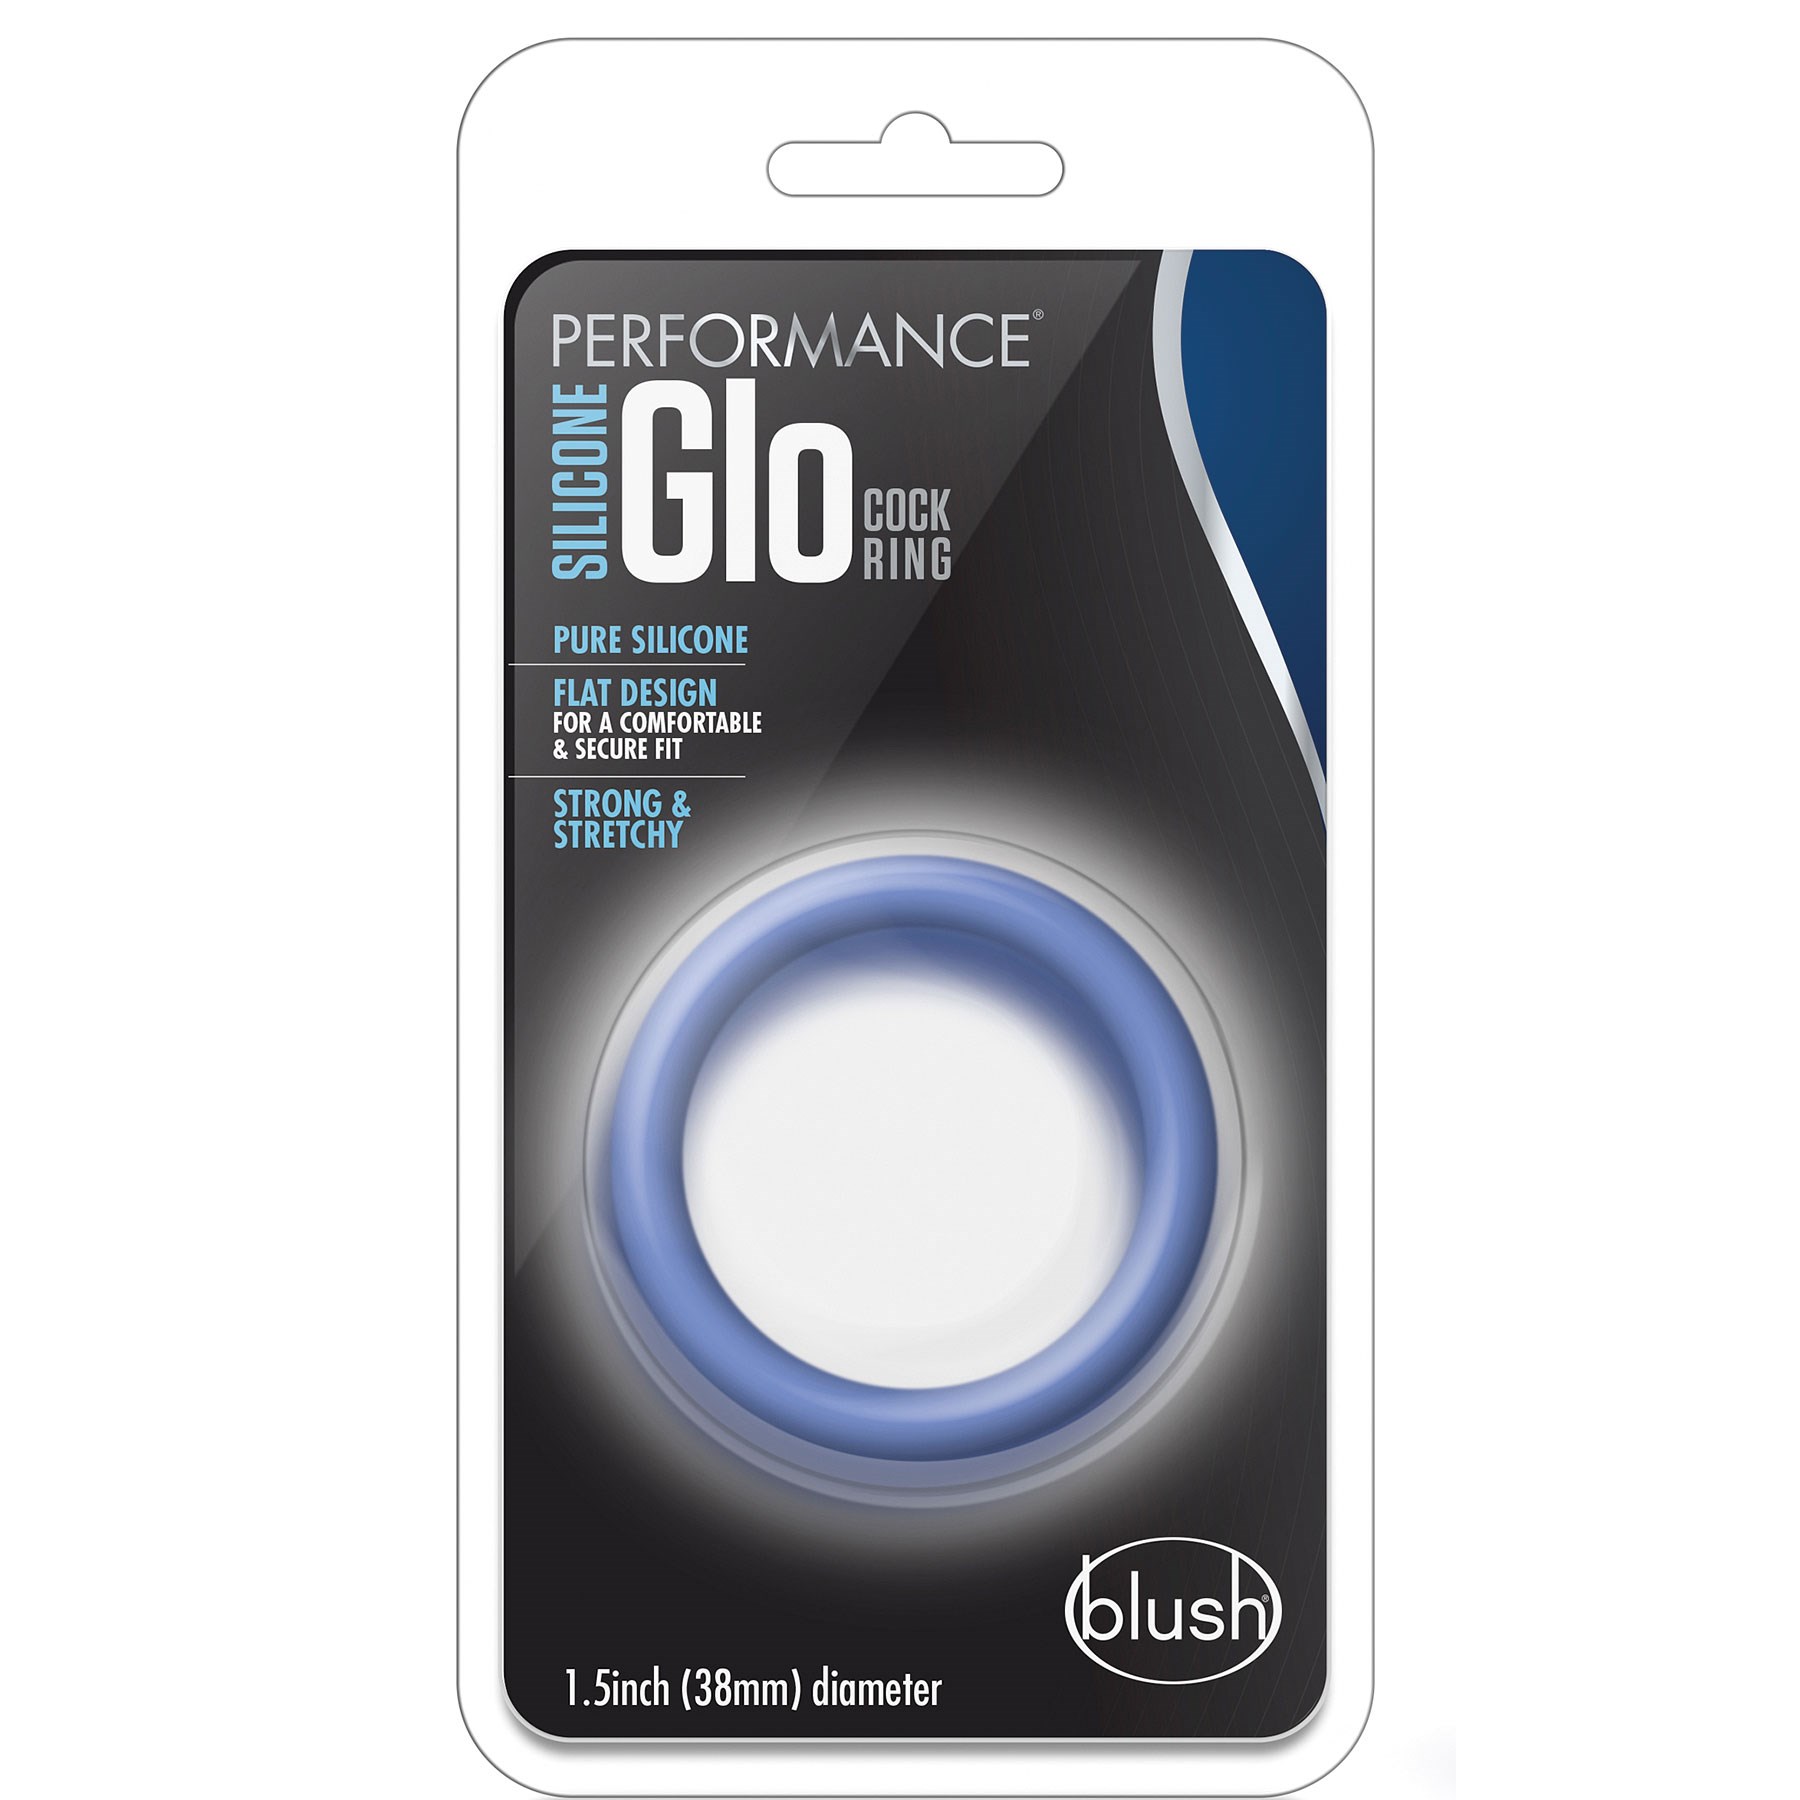 Performance Silicone Glo Cock Ring box